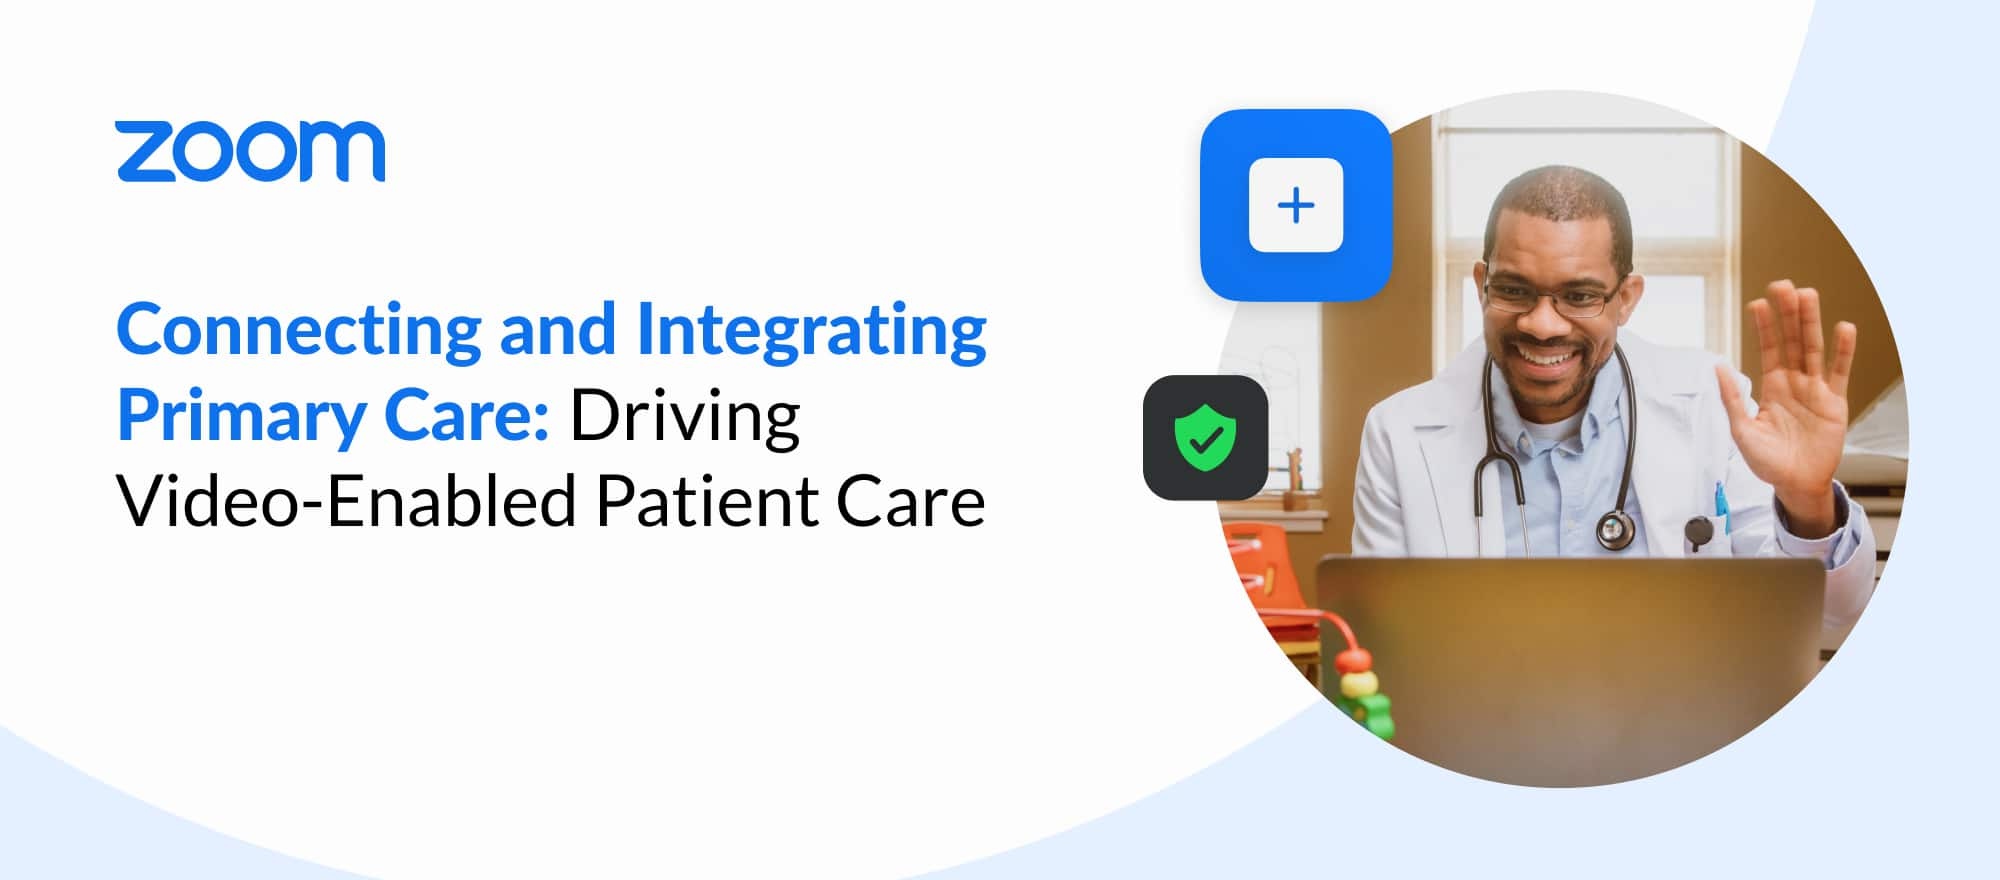 Connecting and Integrating Primary Care: Driving Video-Enabled Patient Care